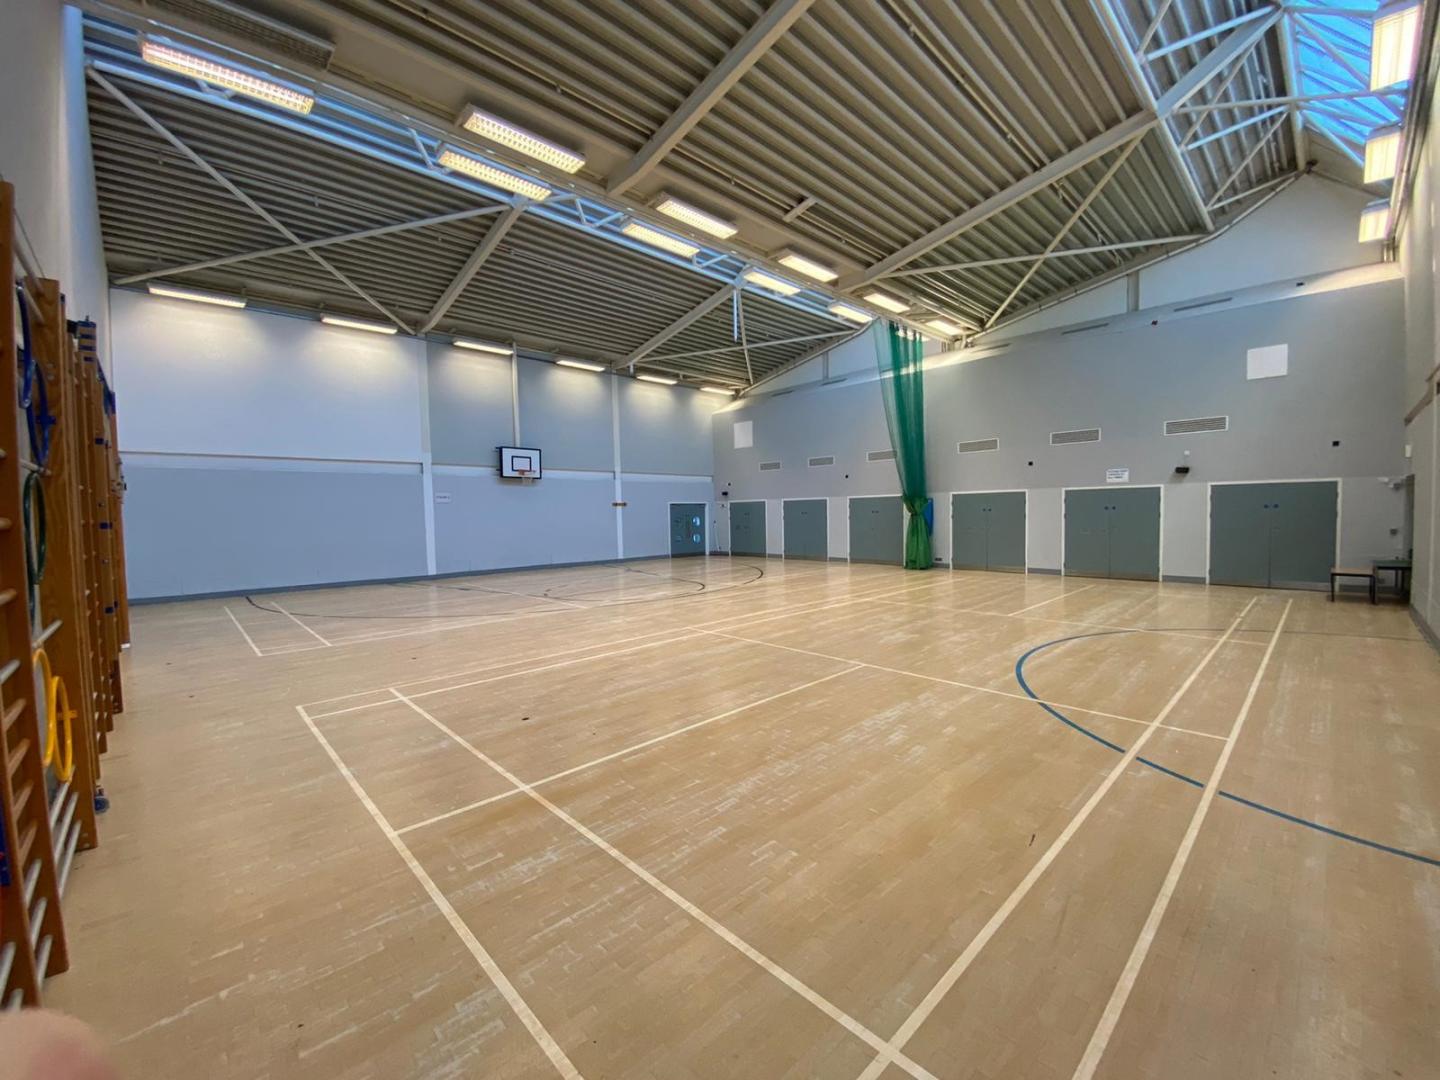 A picture of an indoor  basketball court with wooden floor